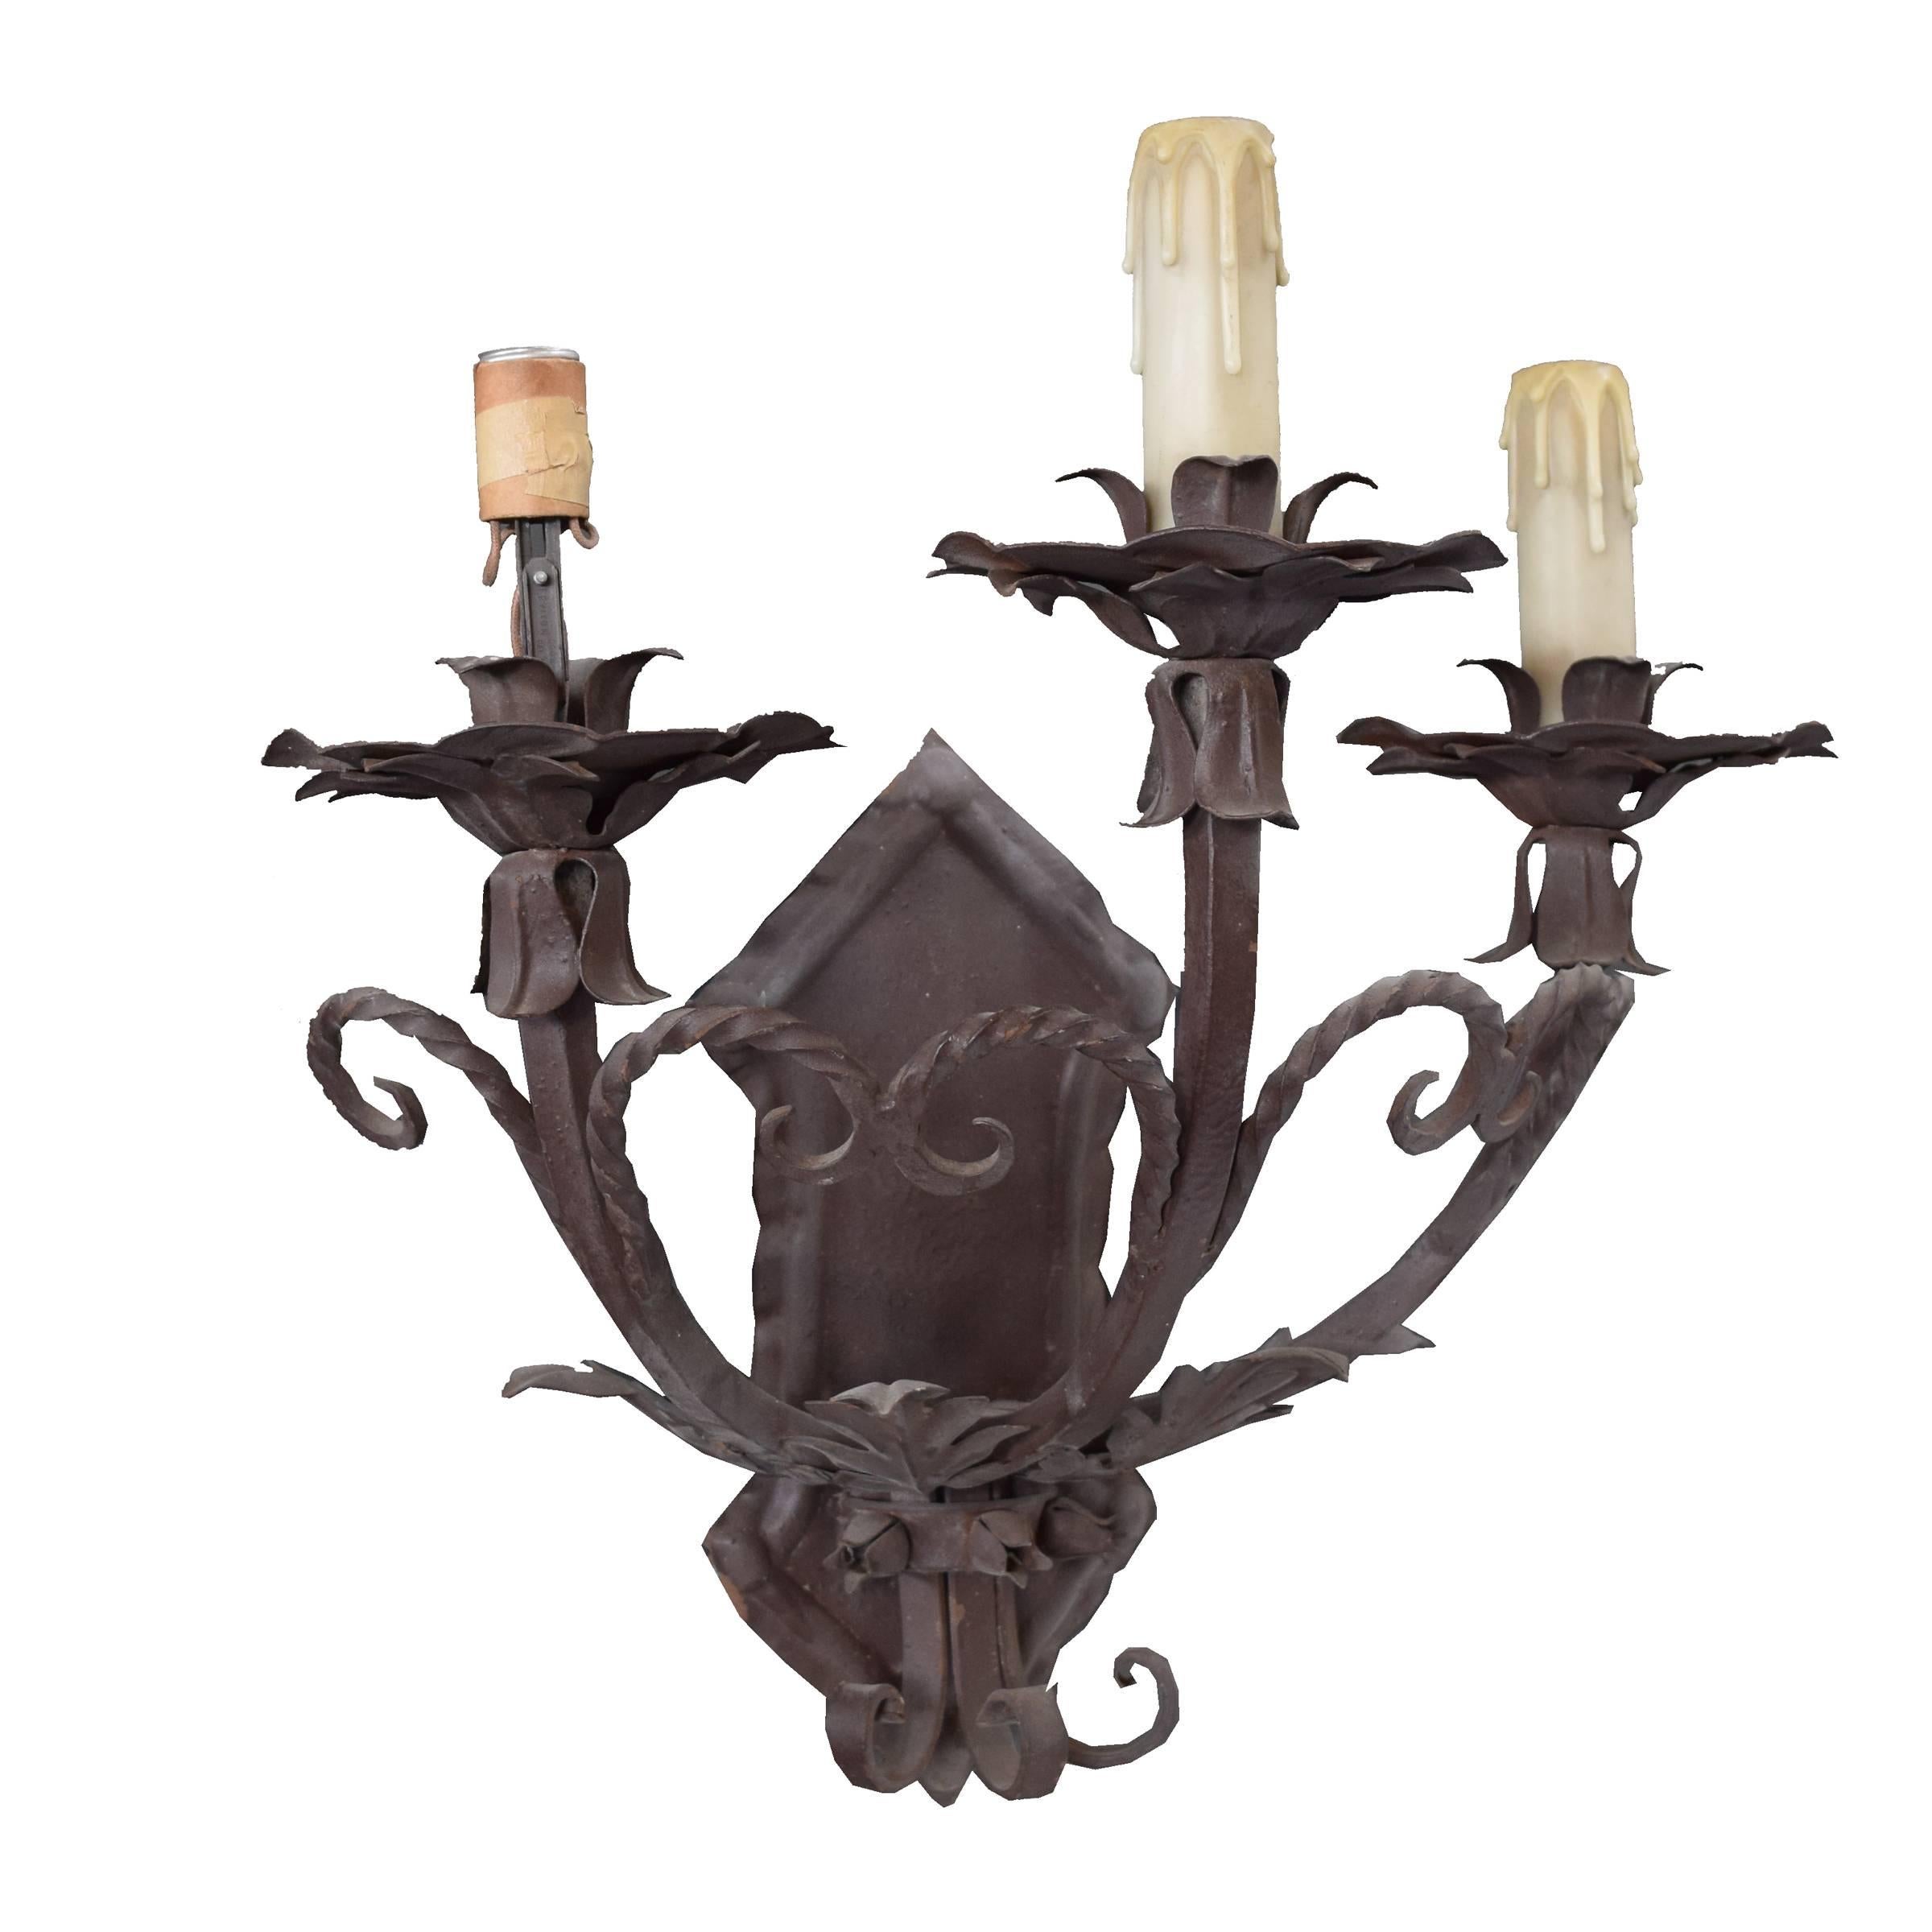 An Argentine wrought iron sconce with three scrolled arms and acanthus leaf and floral bud details, circa 1920.
 